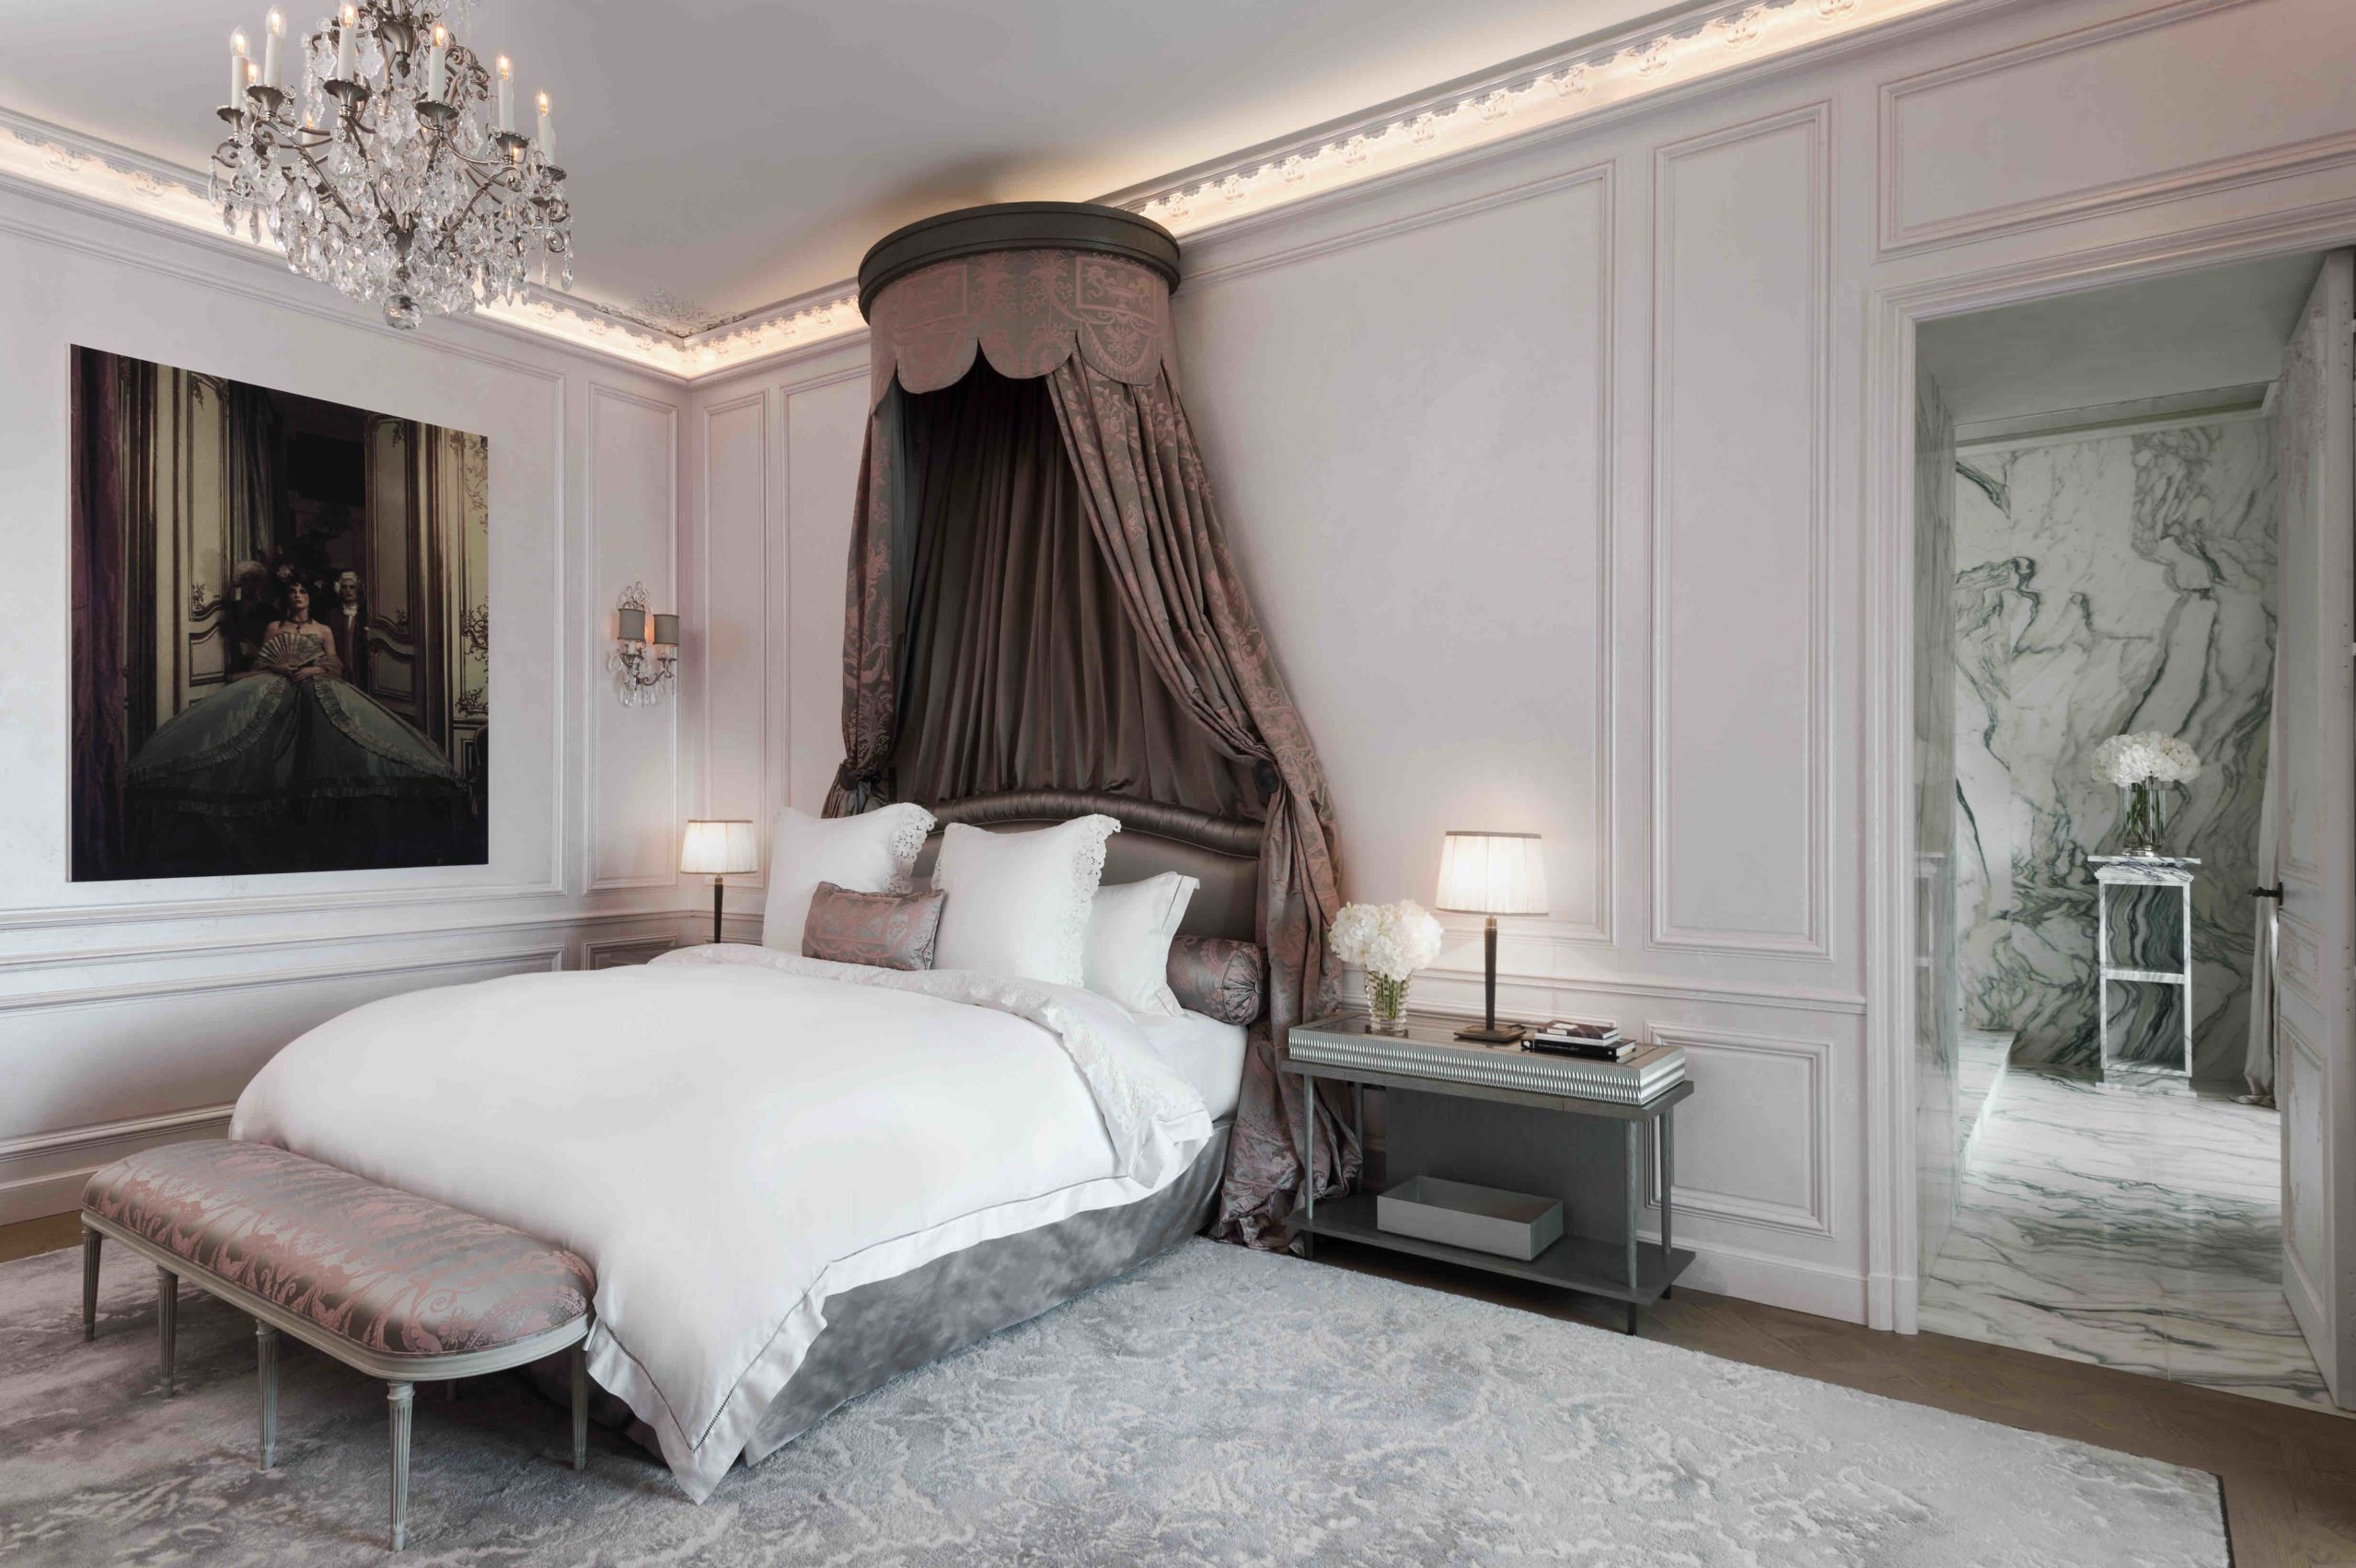 5. Grand Appartment Concorde - Bed room